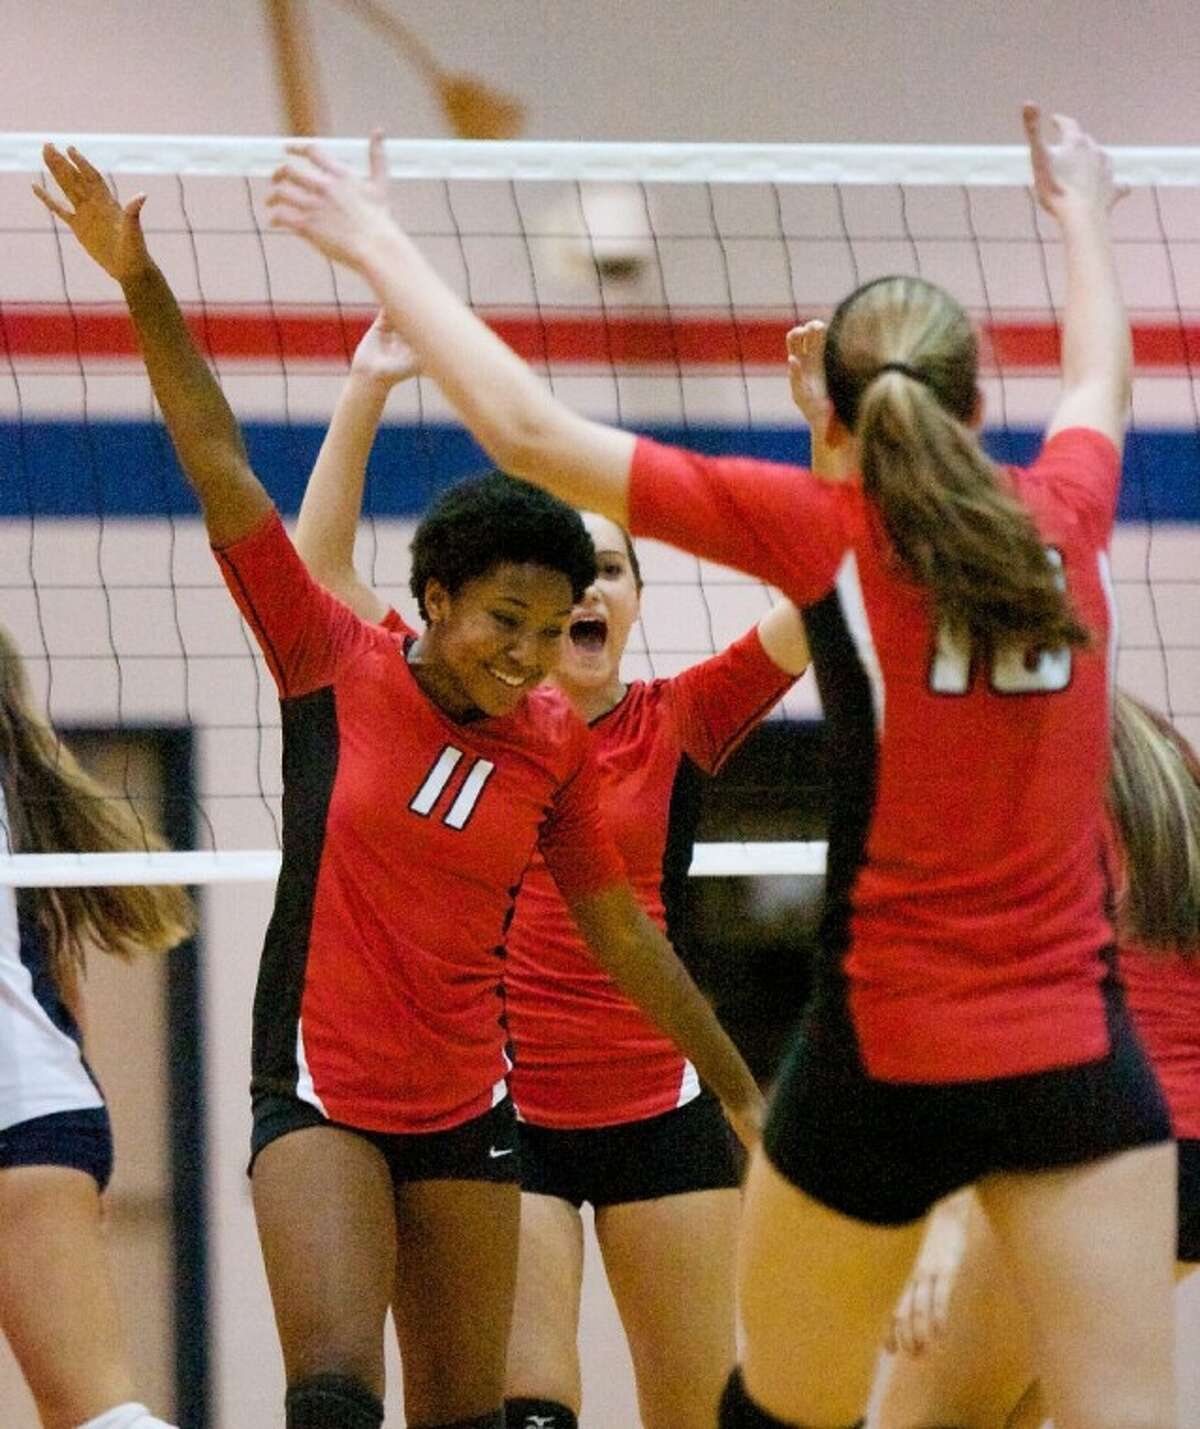 Oak Ridge’s Amber Johnson celebrates a point with teammates during Friday night’s district match against College Park. To purchase or view this photo and others like it, visit: www.yourconroenews.com/photos